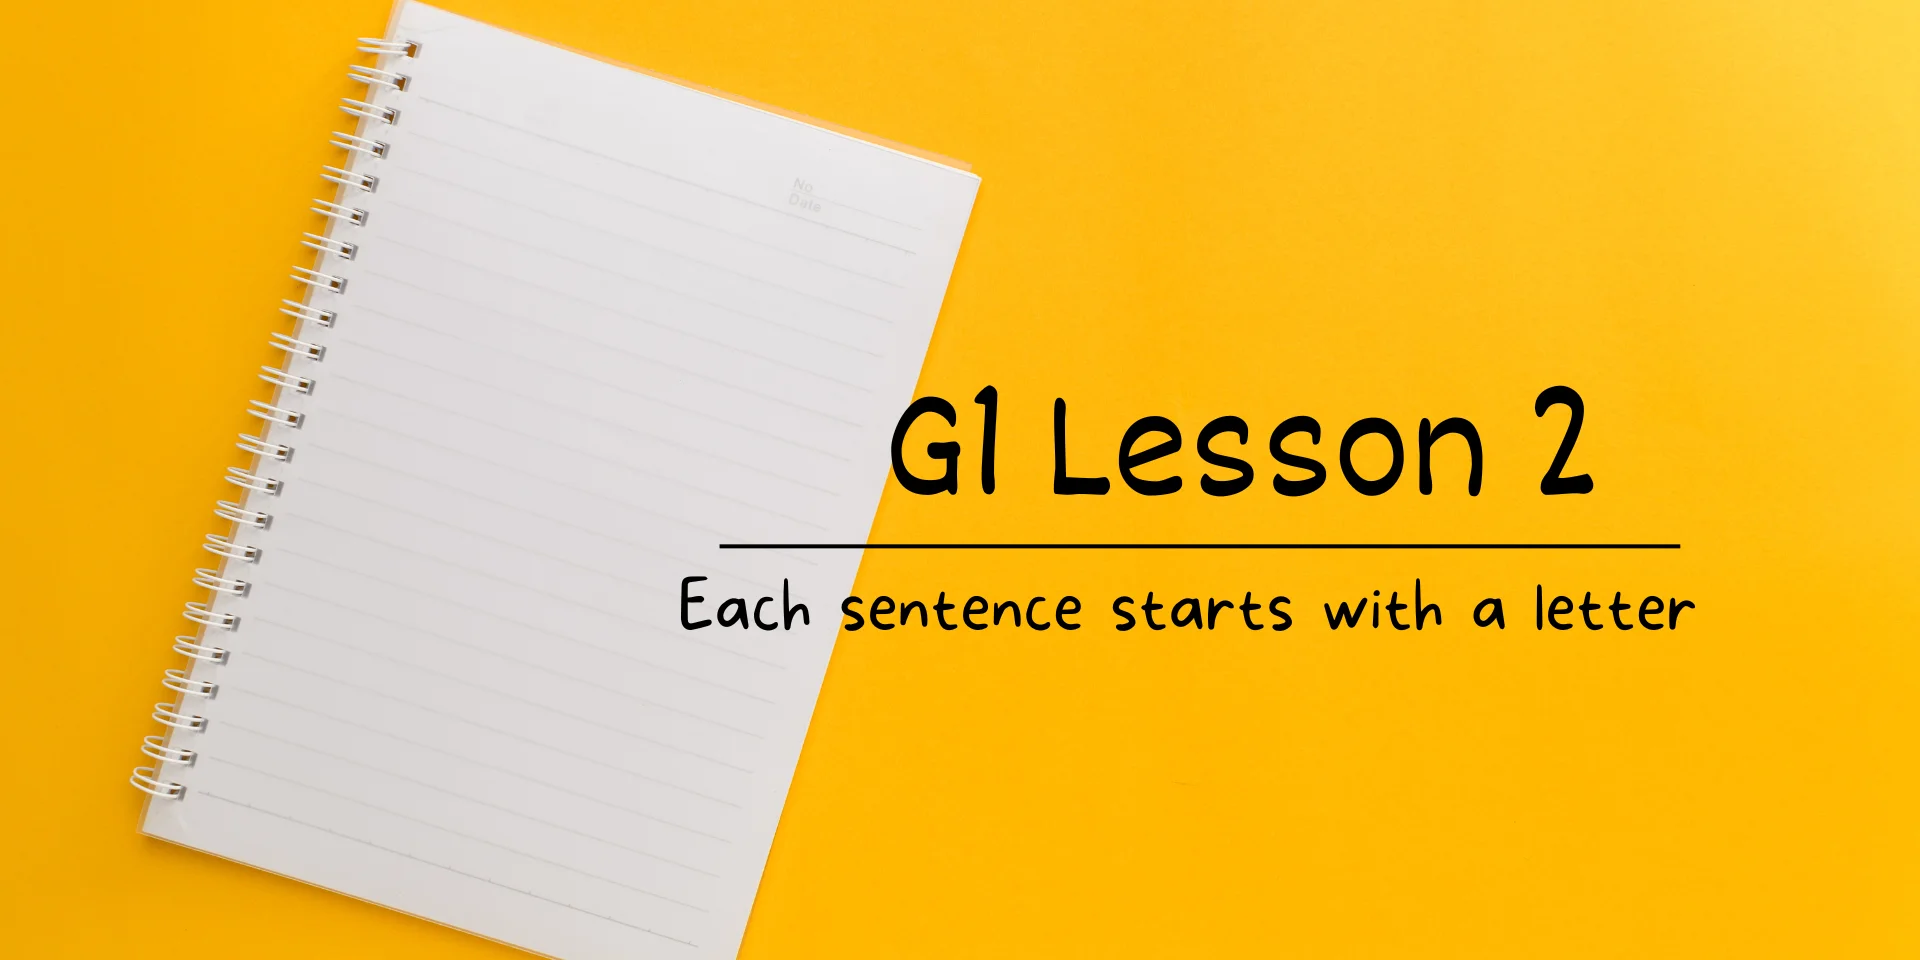 G1 Lesson 2 Each sentence starts with a letter